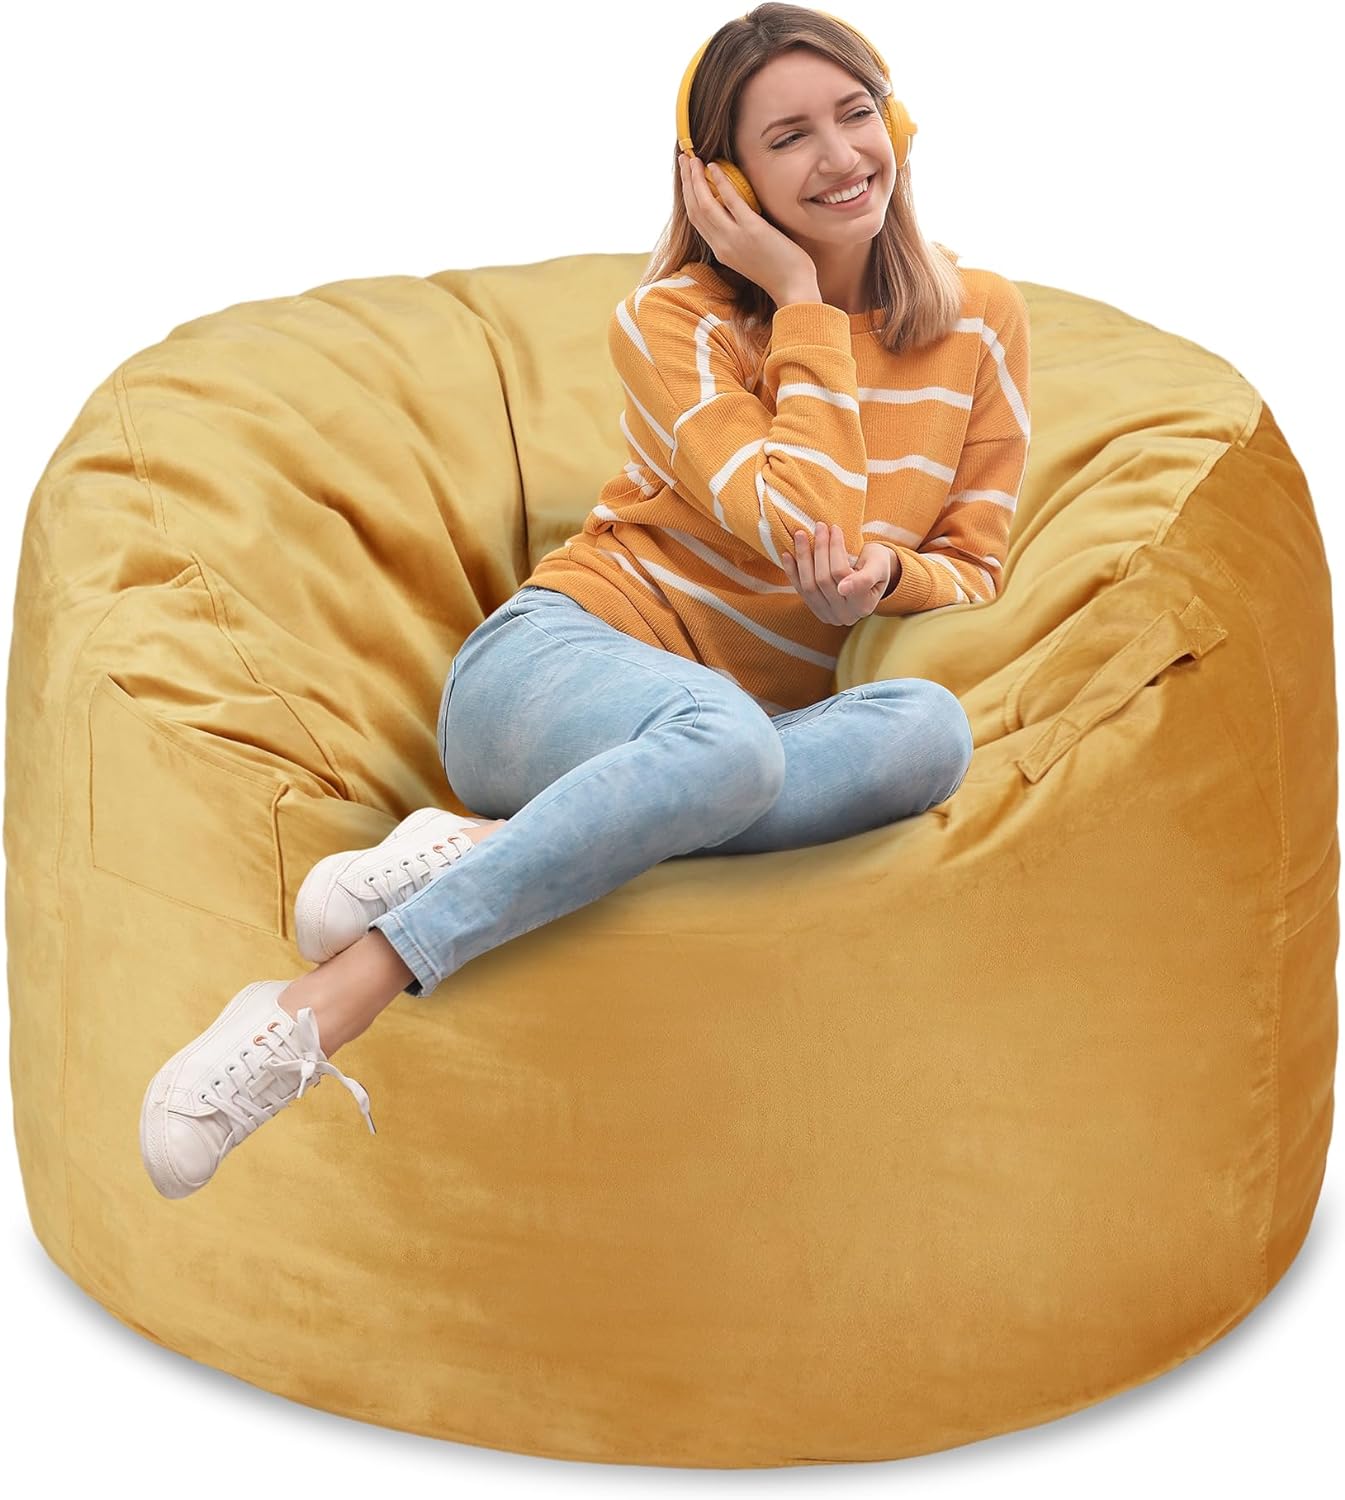 Homguava Bean Bag Chair 3' Bean Bags with Memory Foam Filled, Large Beanbag Chairs Soft Sofa with Dutch Velet Cover-36×36"×24"(Mustard)